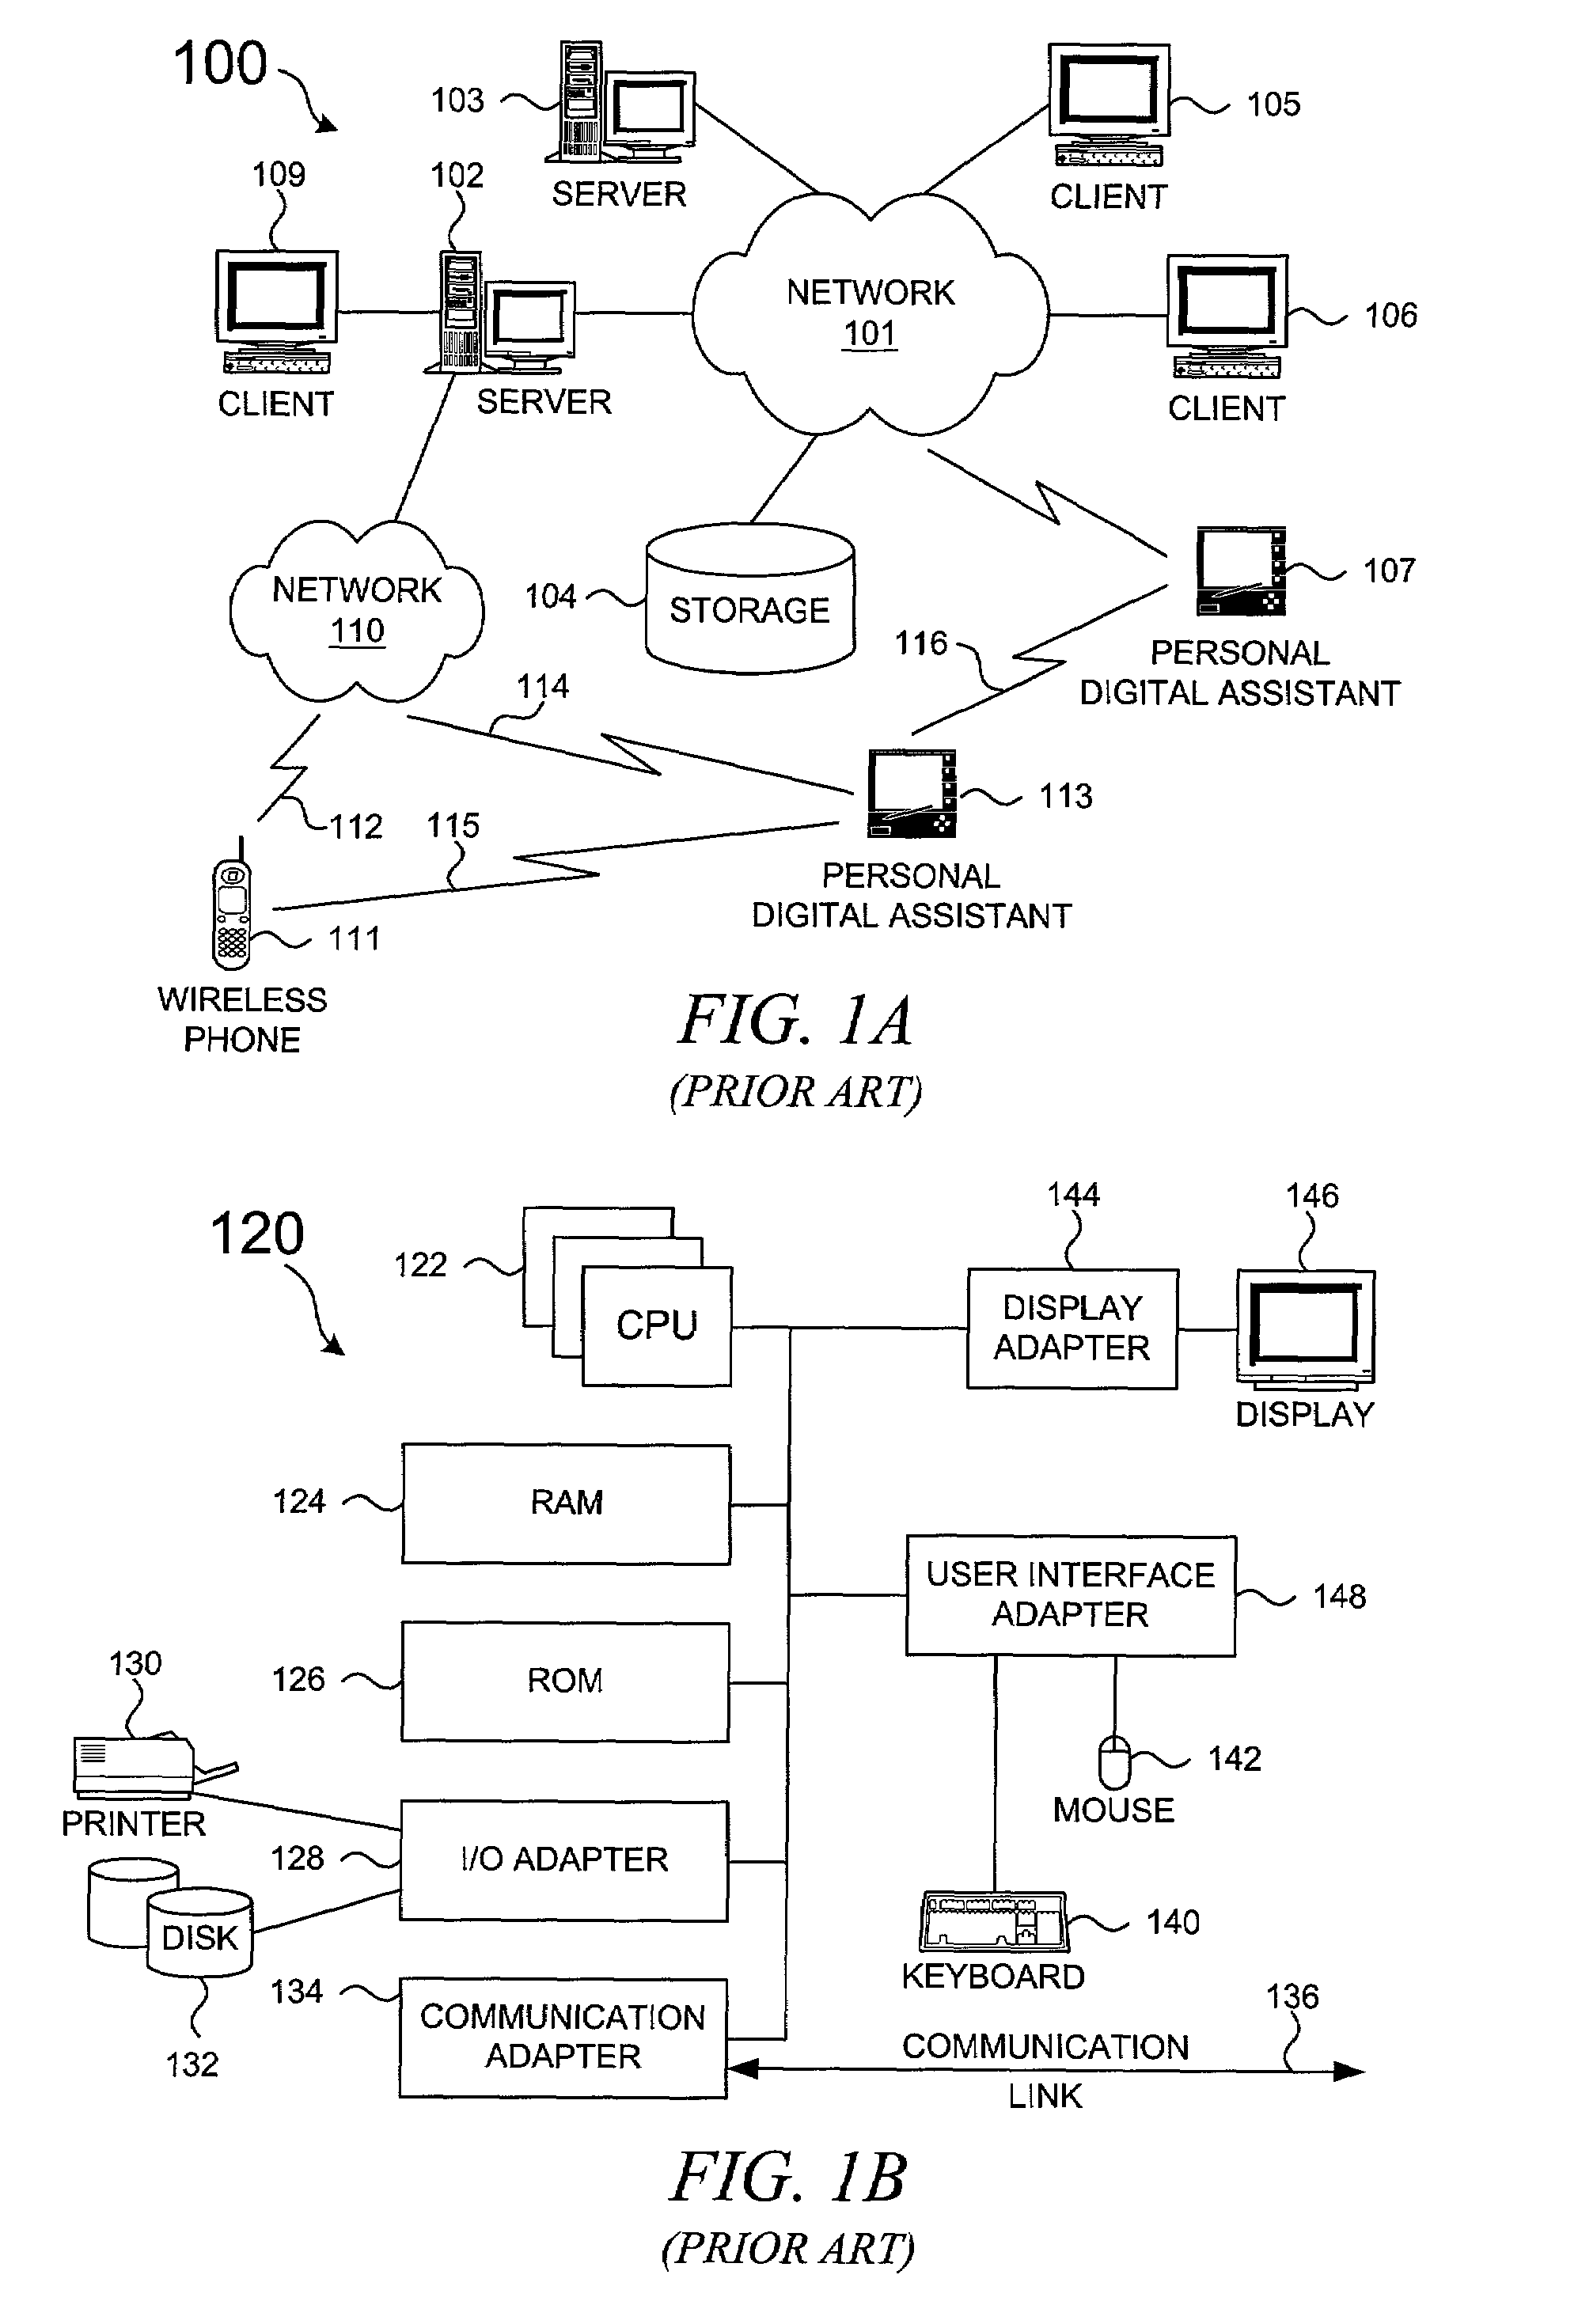 Method and system for a single-sign-on mechanism within application service provider (ASP) aggregation